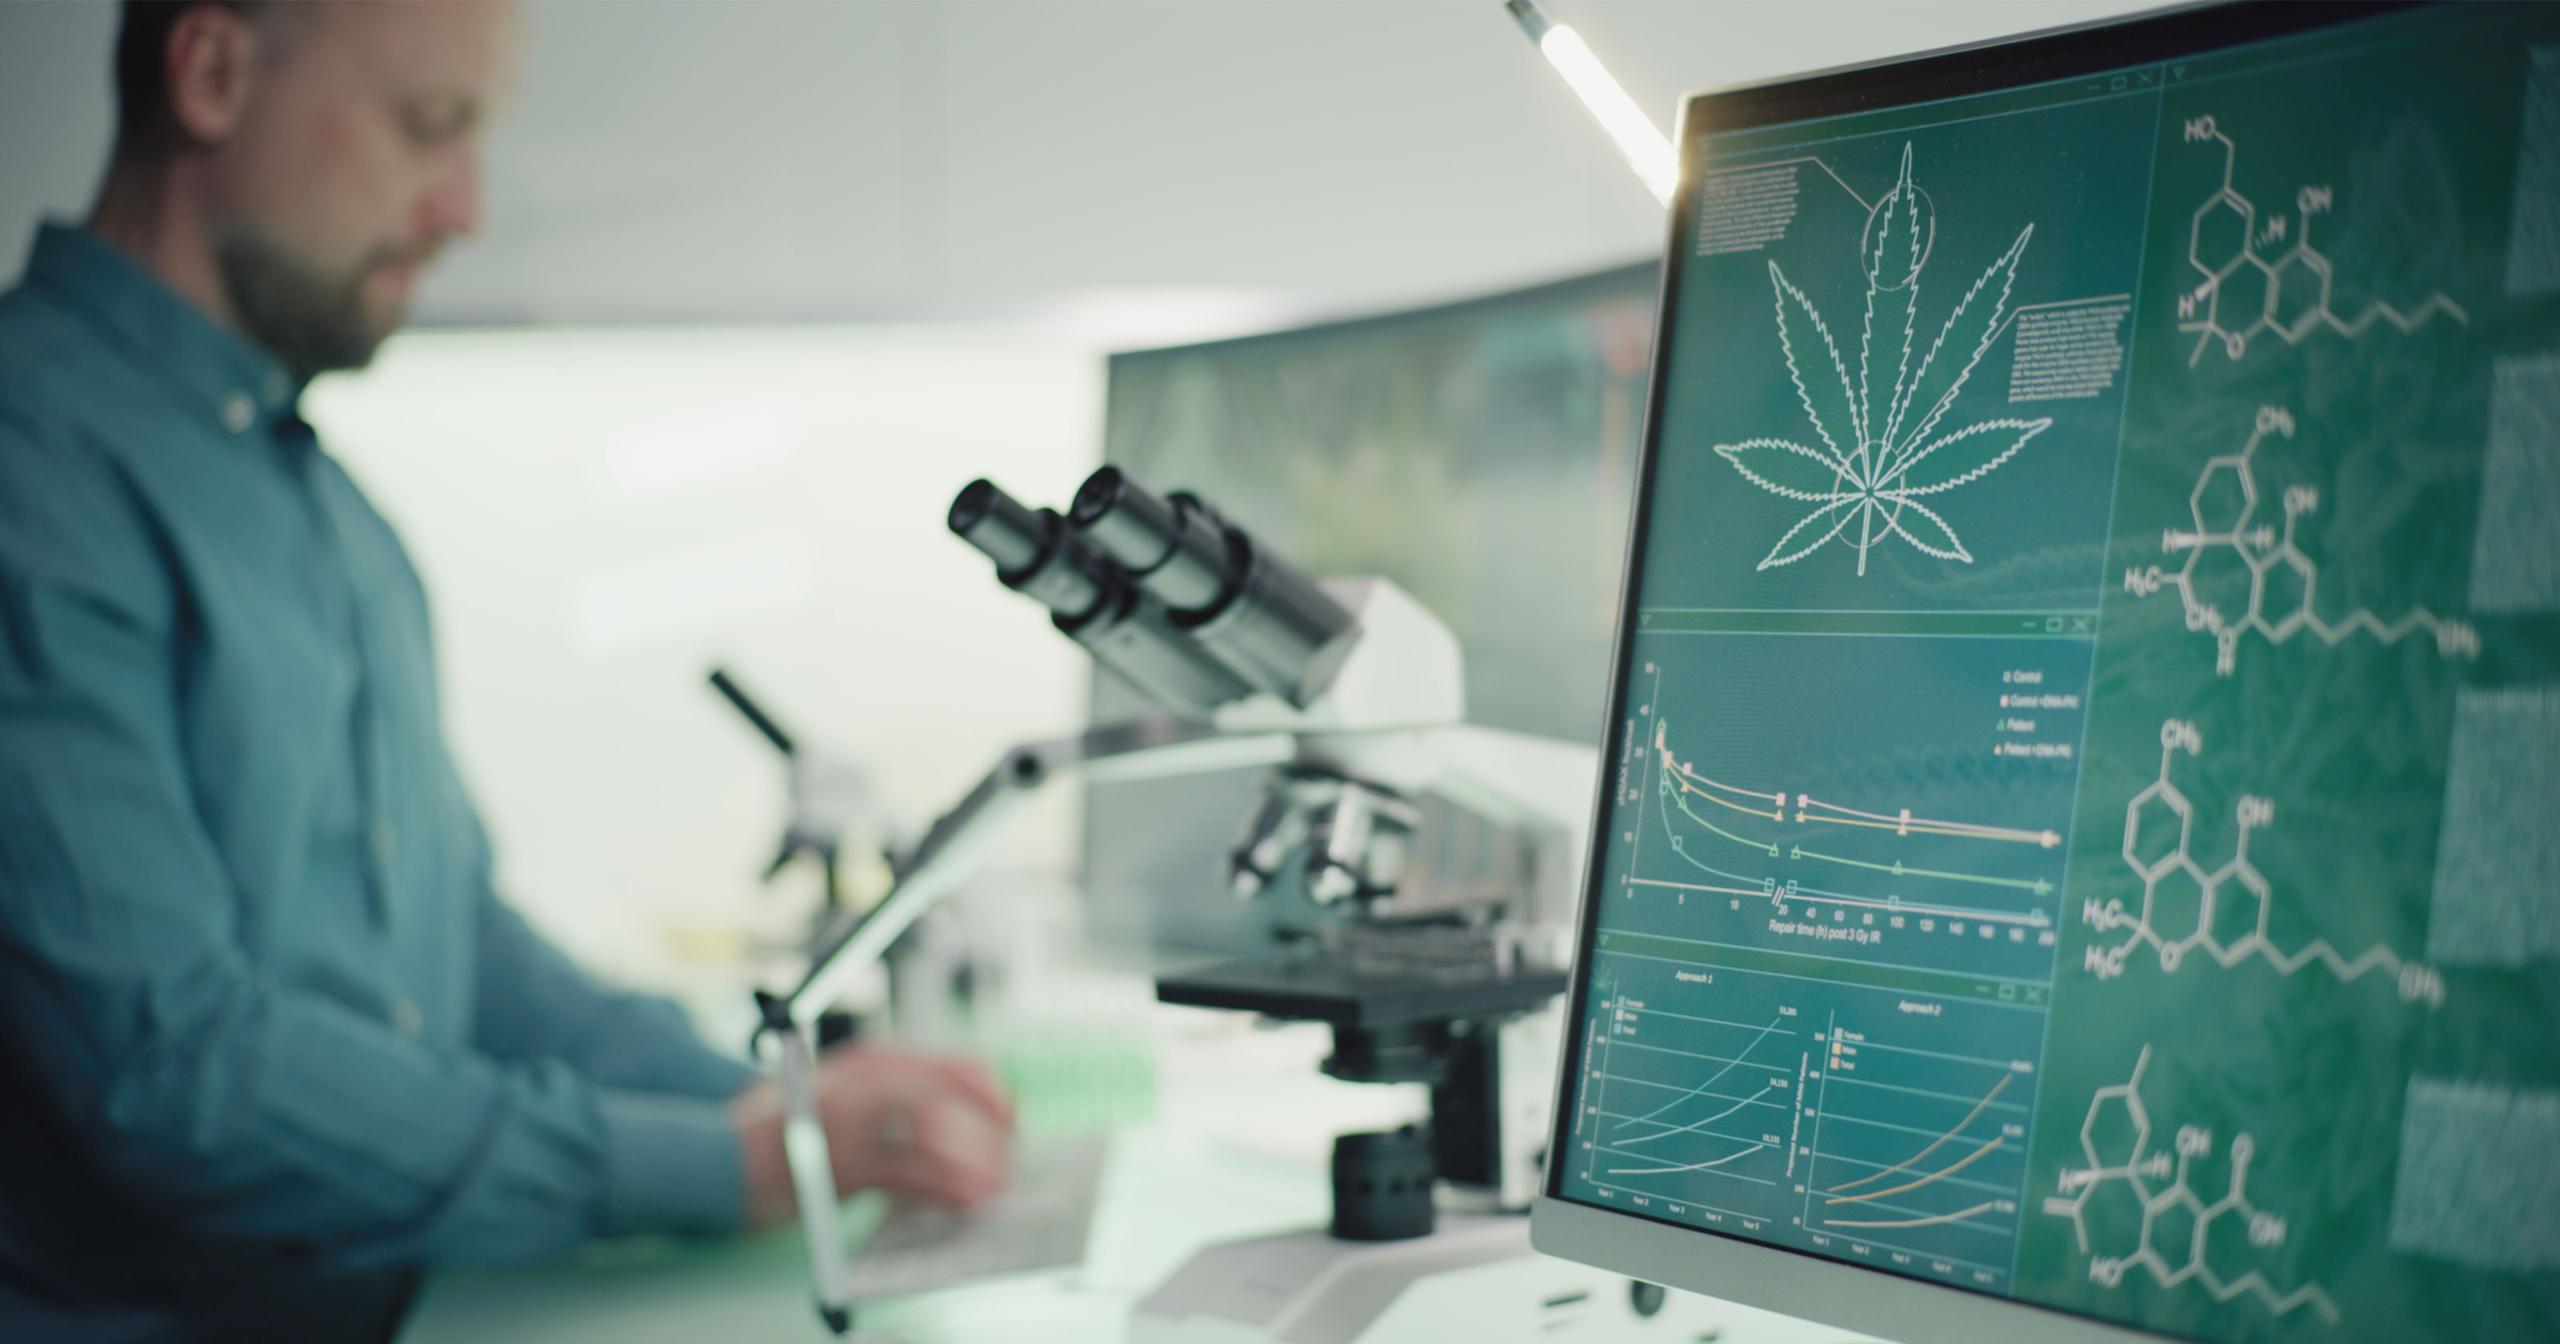 How Does Cannabis Affect the Gut Microbiome?